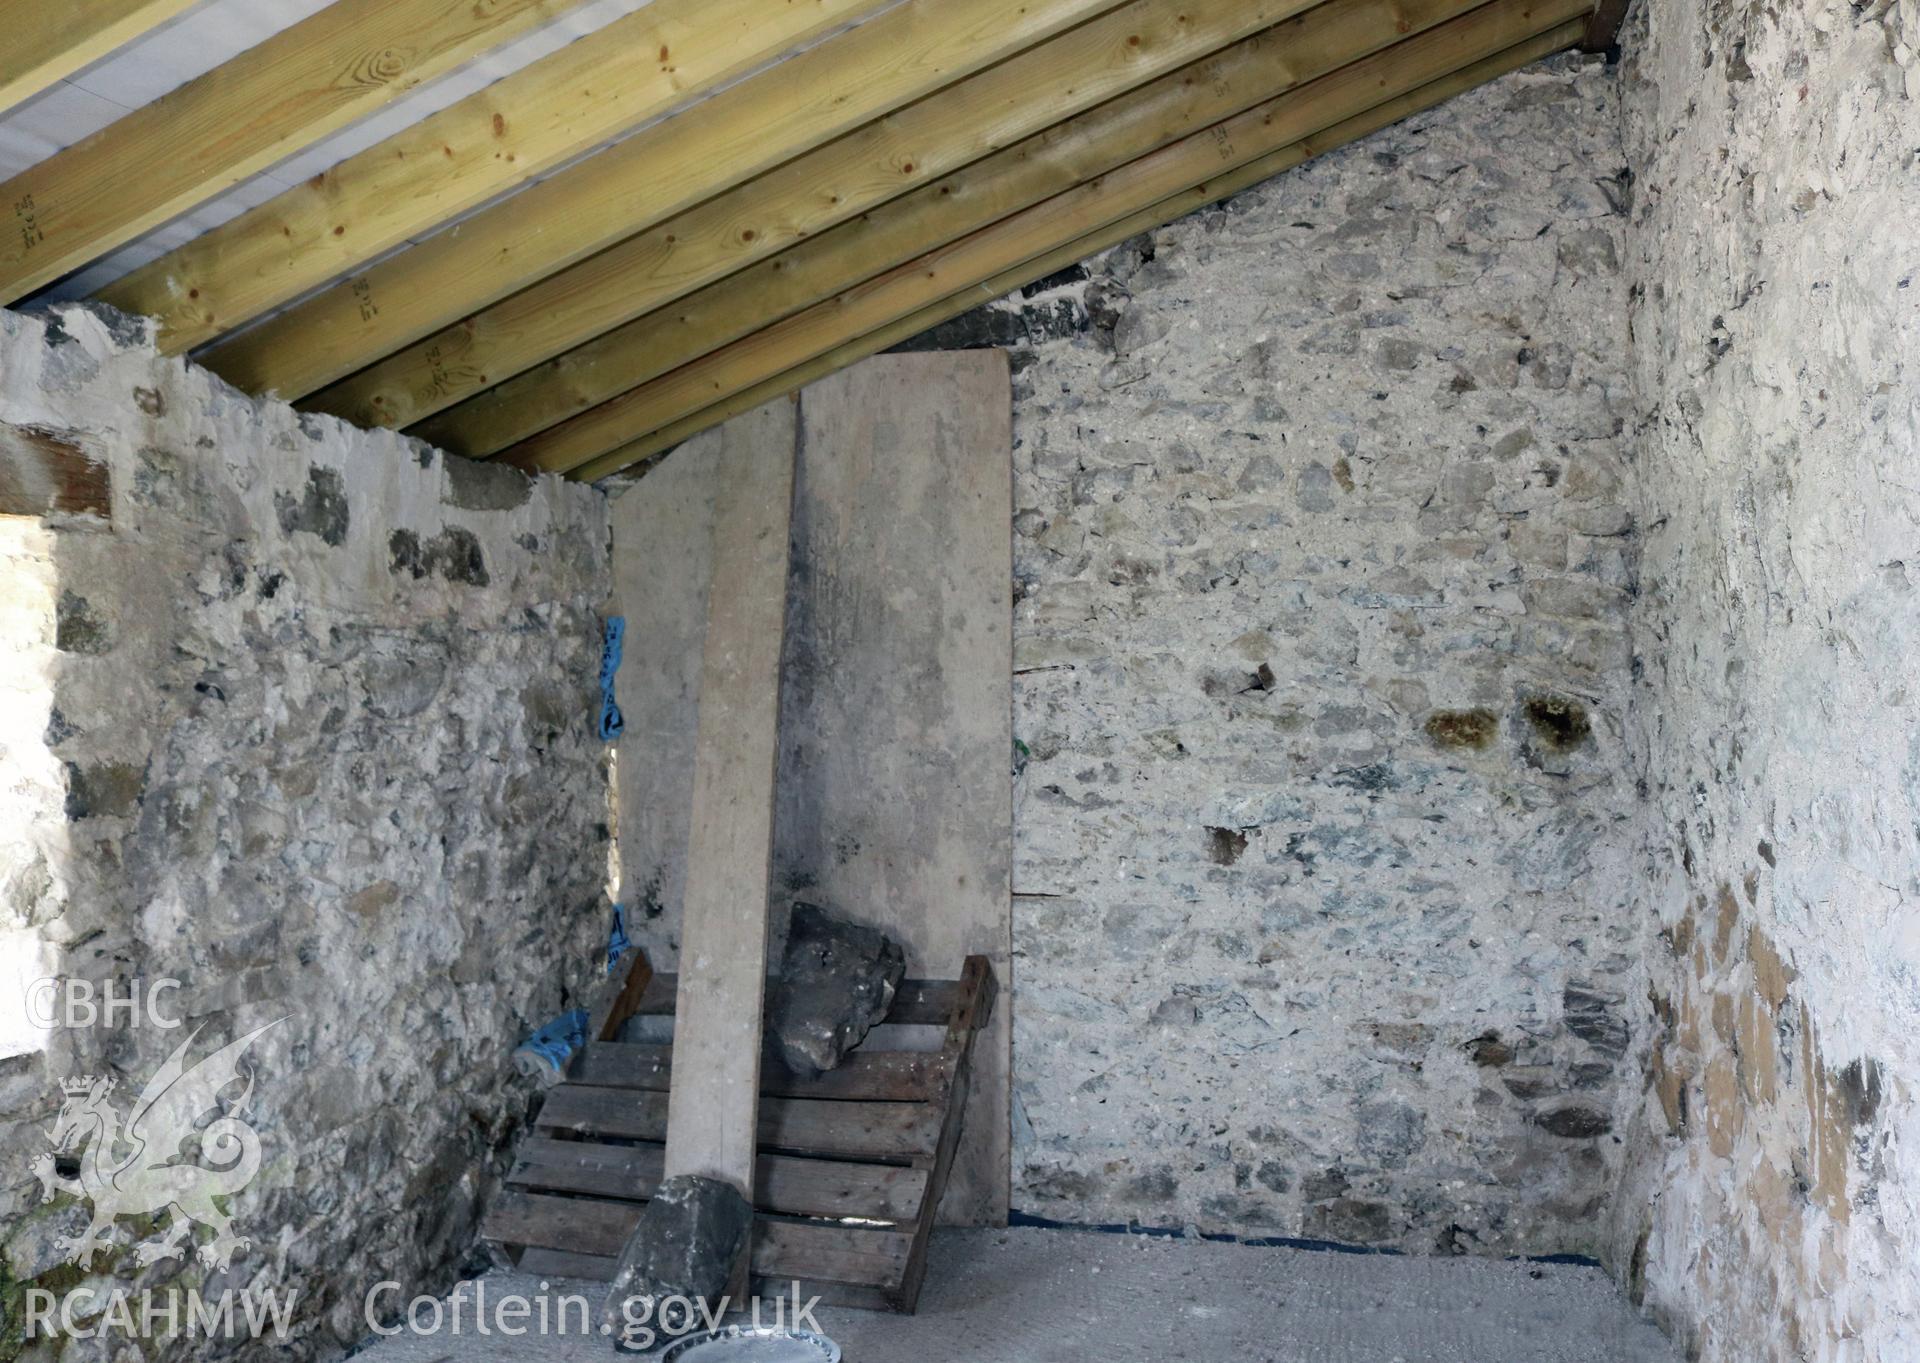 Photograph showing interior view of barn and cottage ground floor at Maes yr Hendre, taken by Dr Marian Gwyn, 6th July 2016. (Original Reference no. 0085)